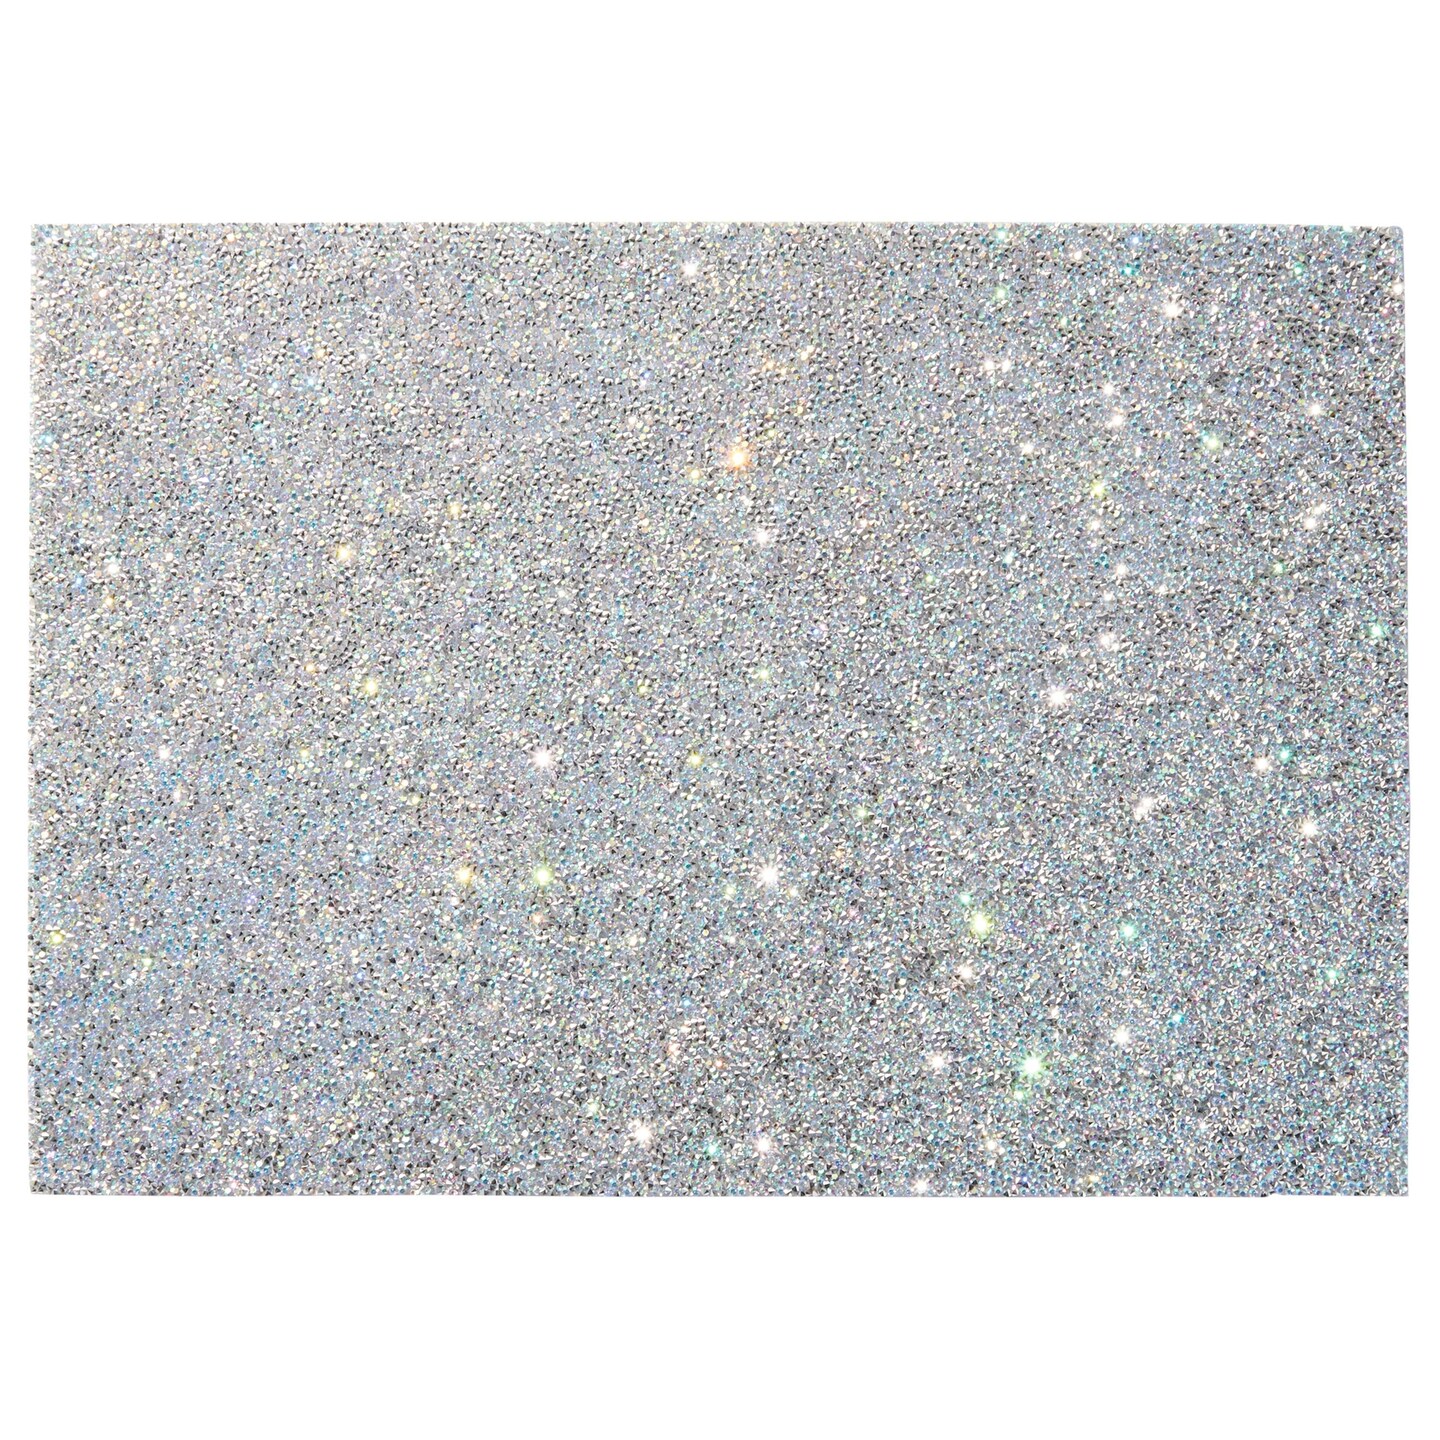 17x12-Inch Glitter Nail Mat for Pictures, Manicure Hand Rest (Dark